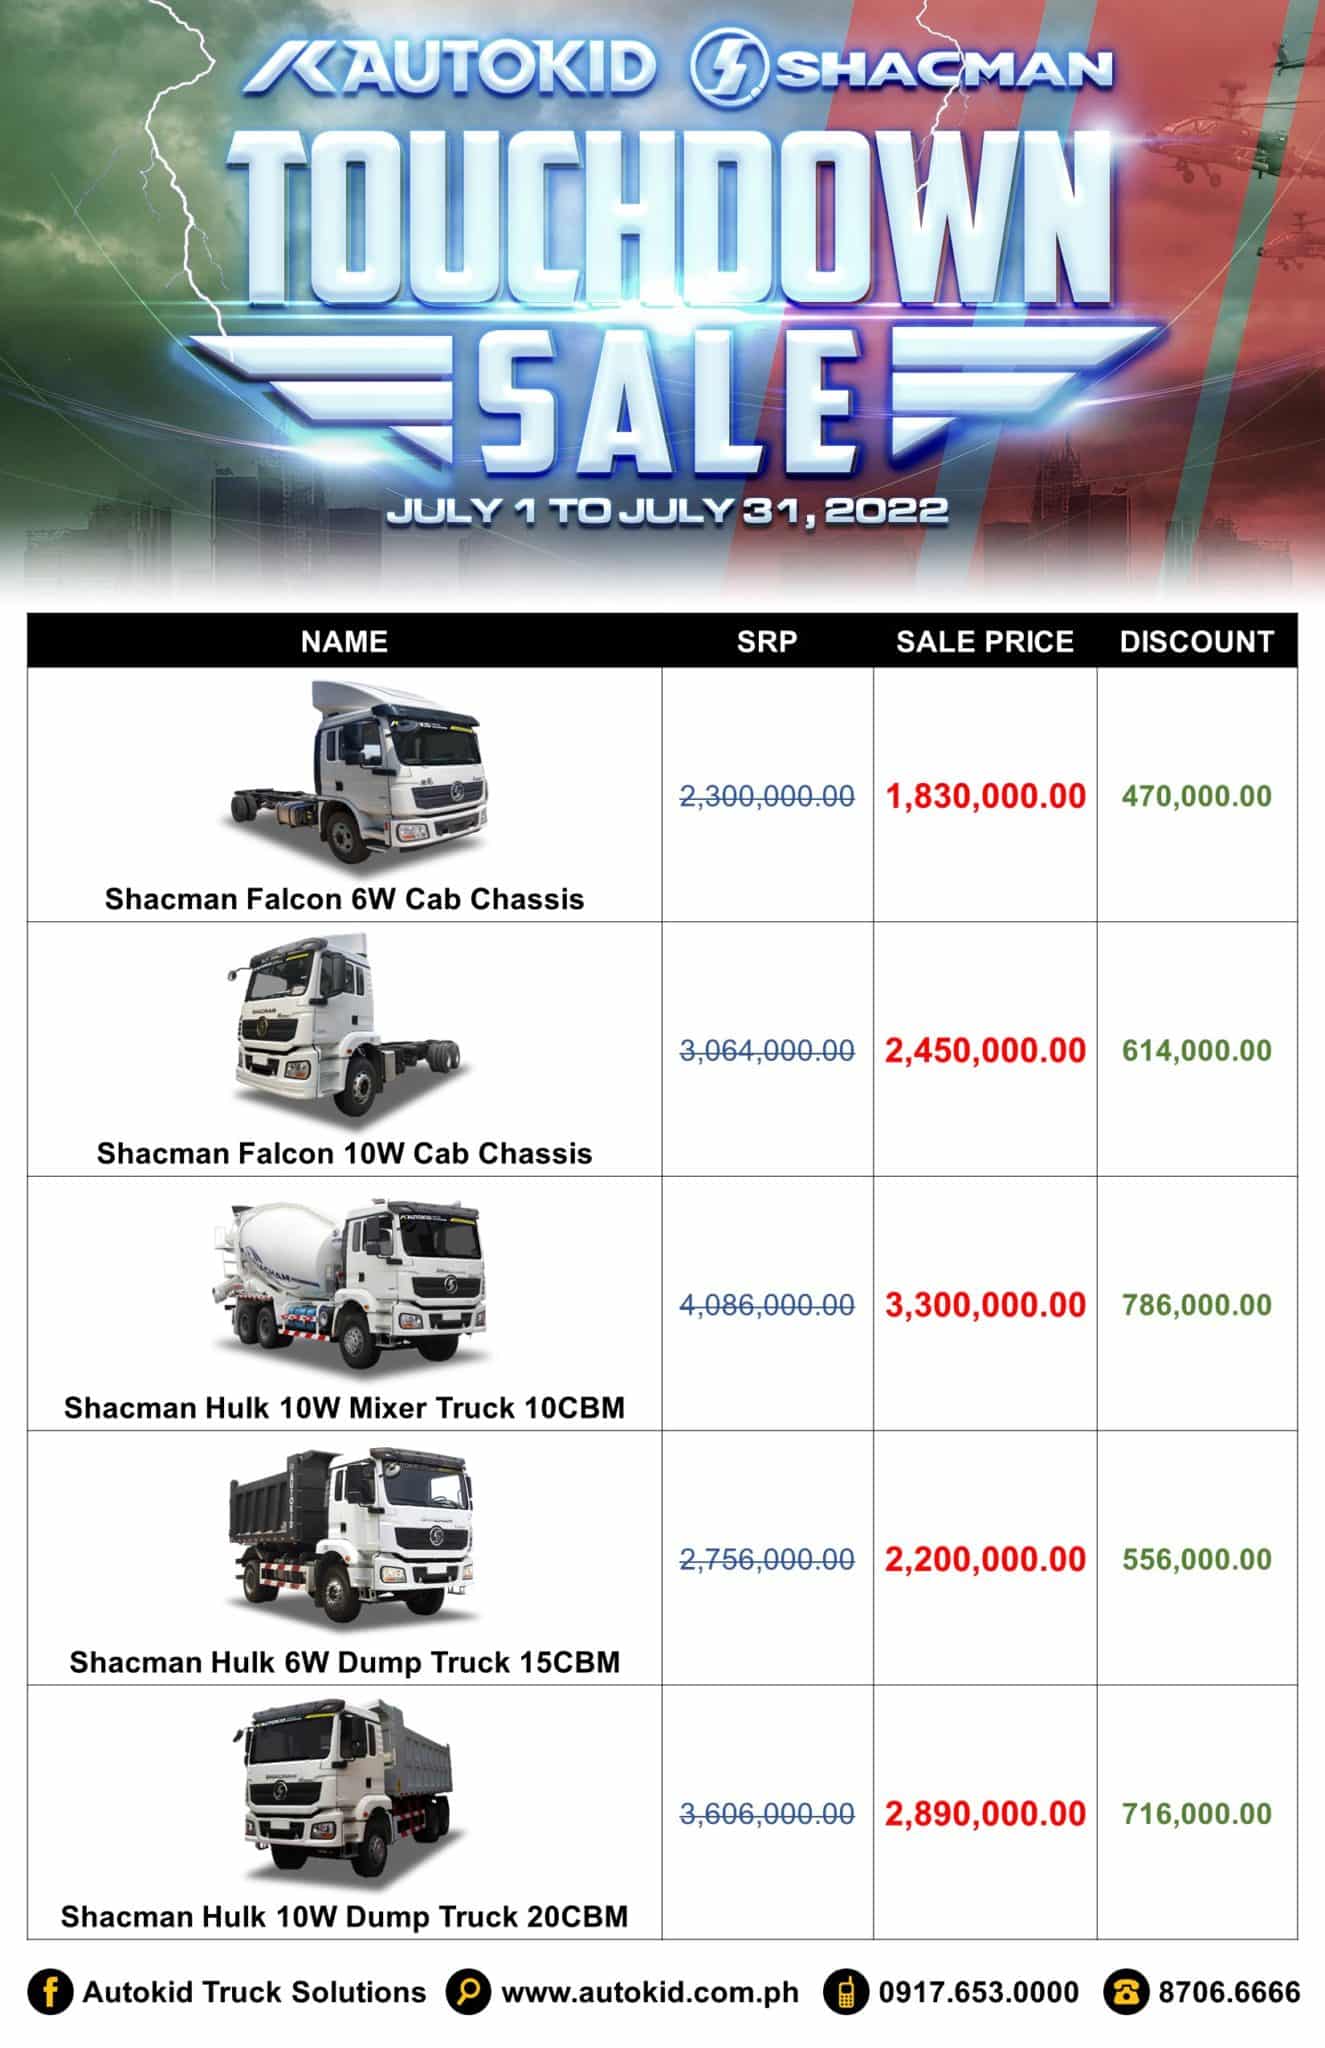 Shacman is now available at Autokid showrooms! Enjoy up to ₱750k cash discount plus freebies in this month’s Shacman Touchdown Sale.